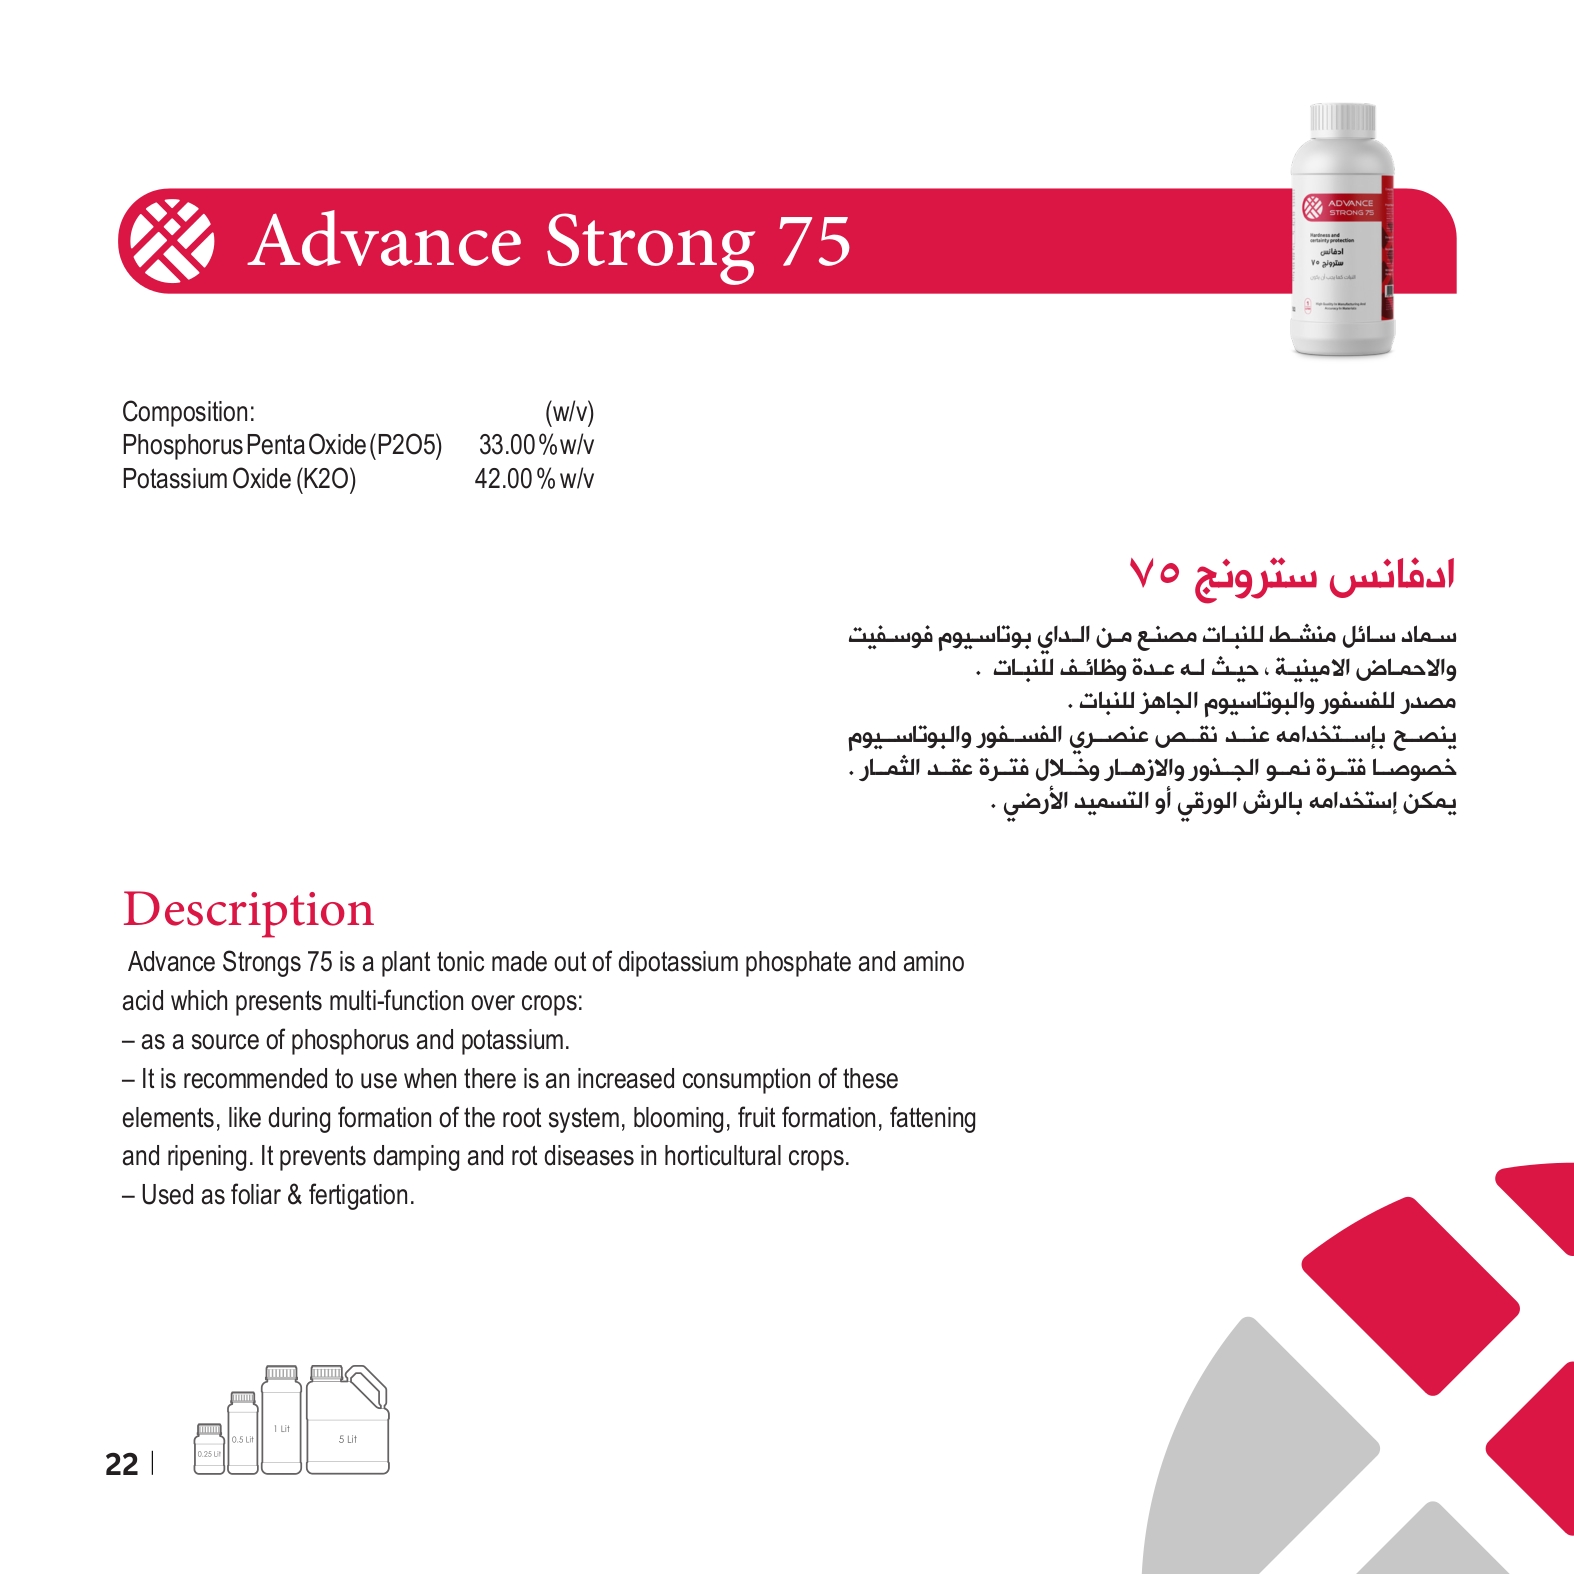 Advance Strong 75